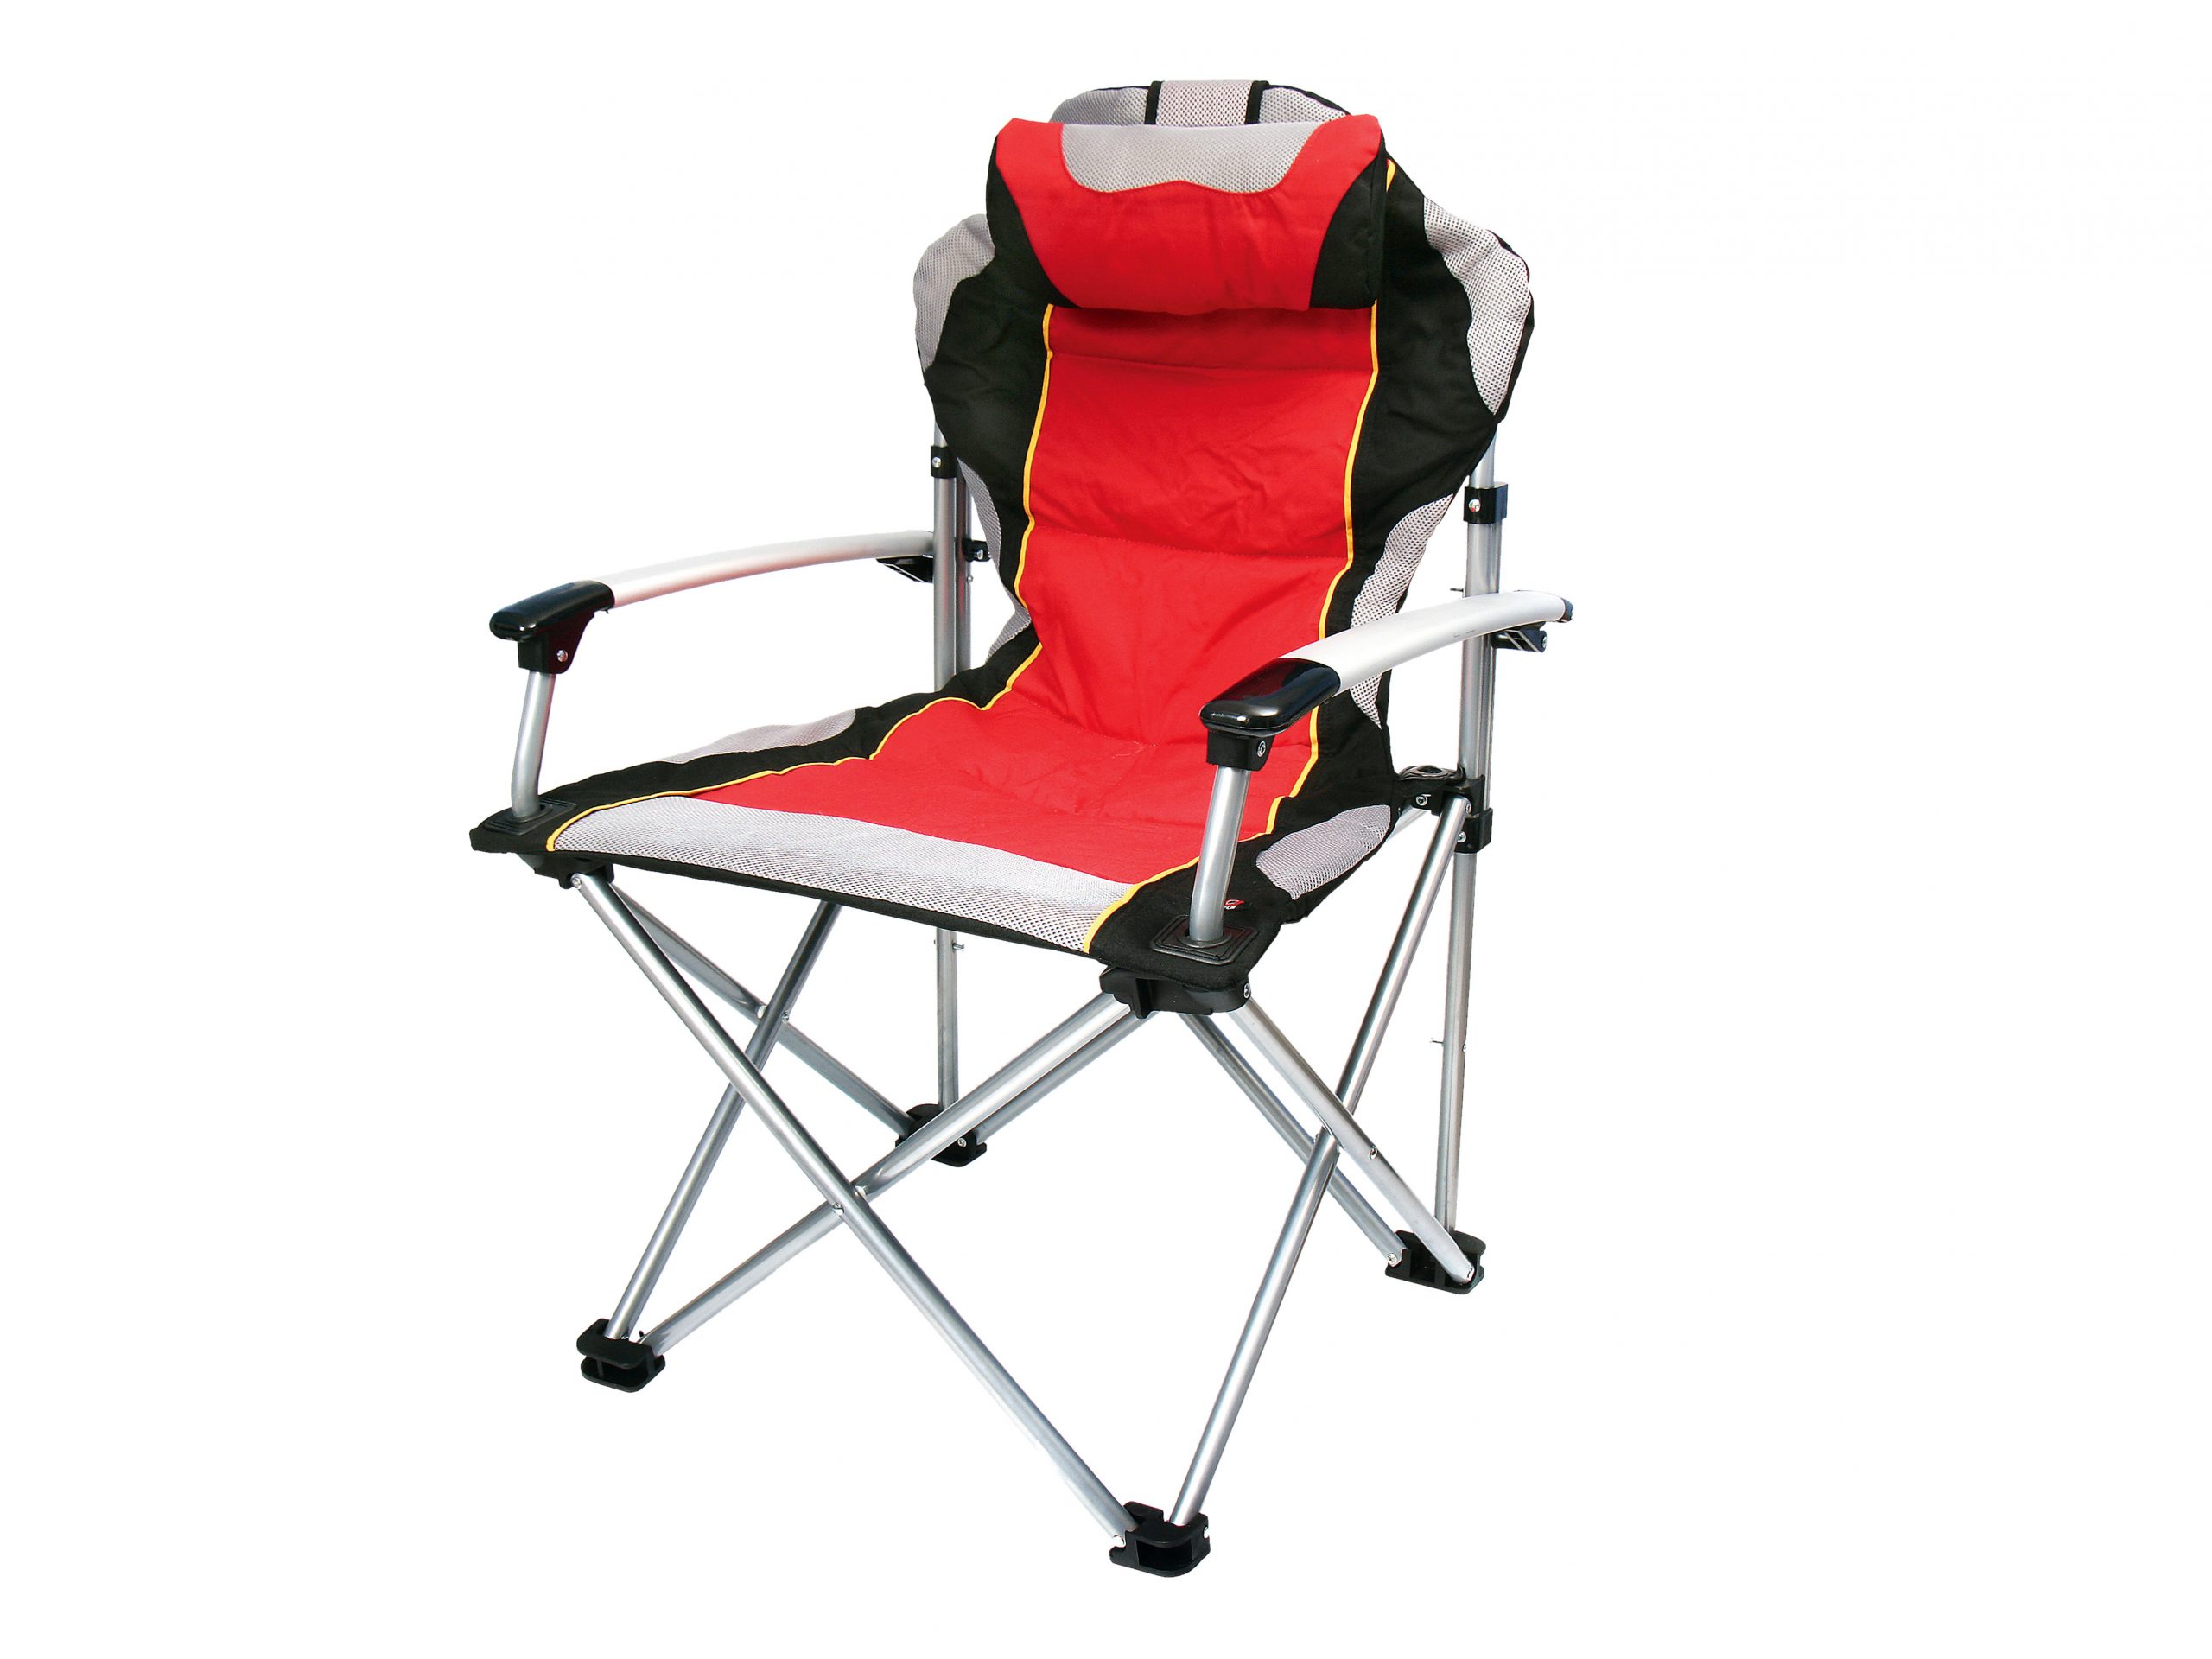 Riptide Blue Promech Racing Fold-Up Camping Garden Paddock Chair with Carry Bag